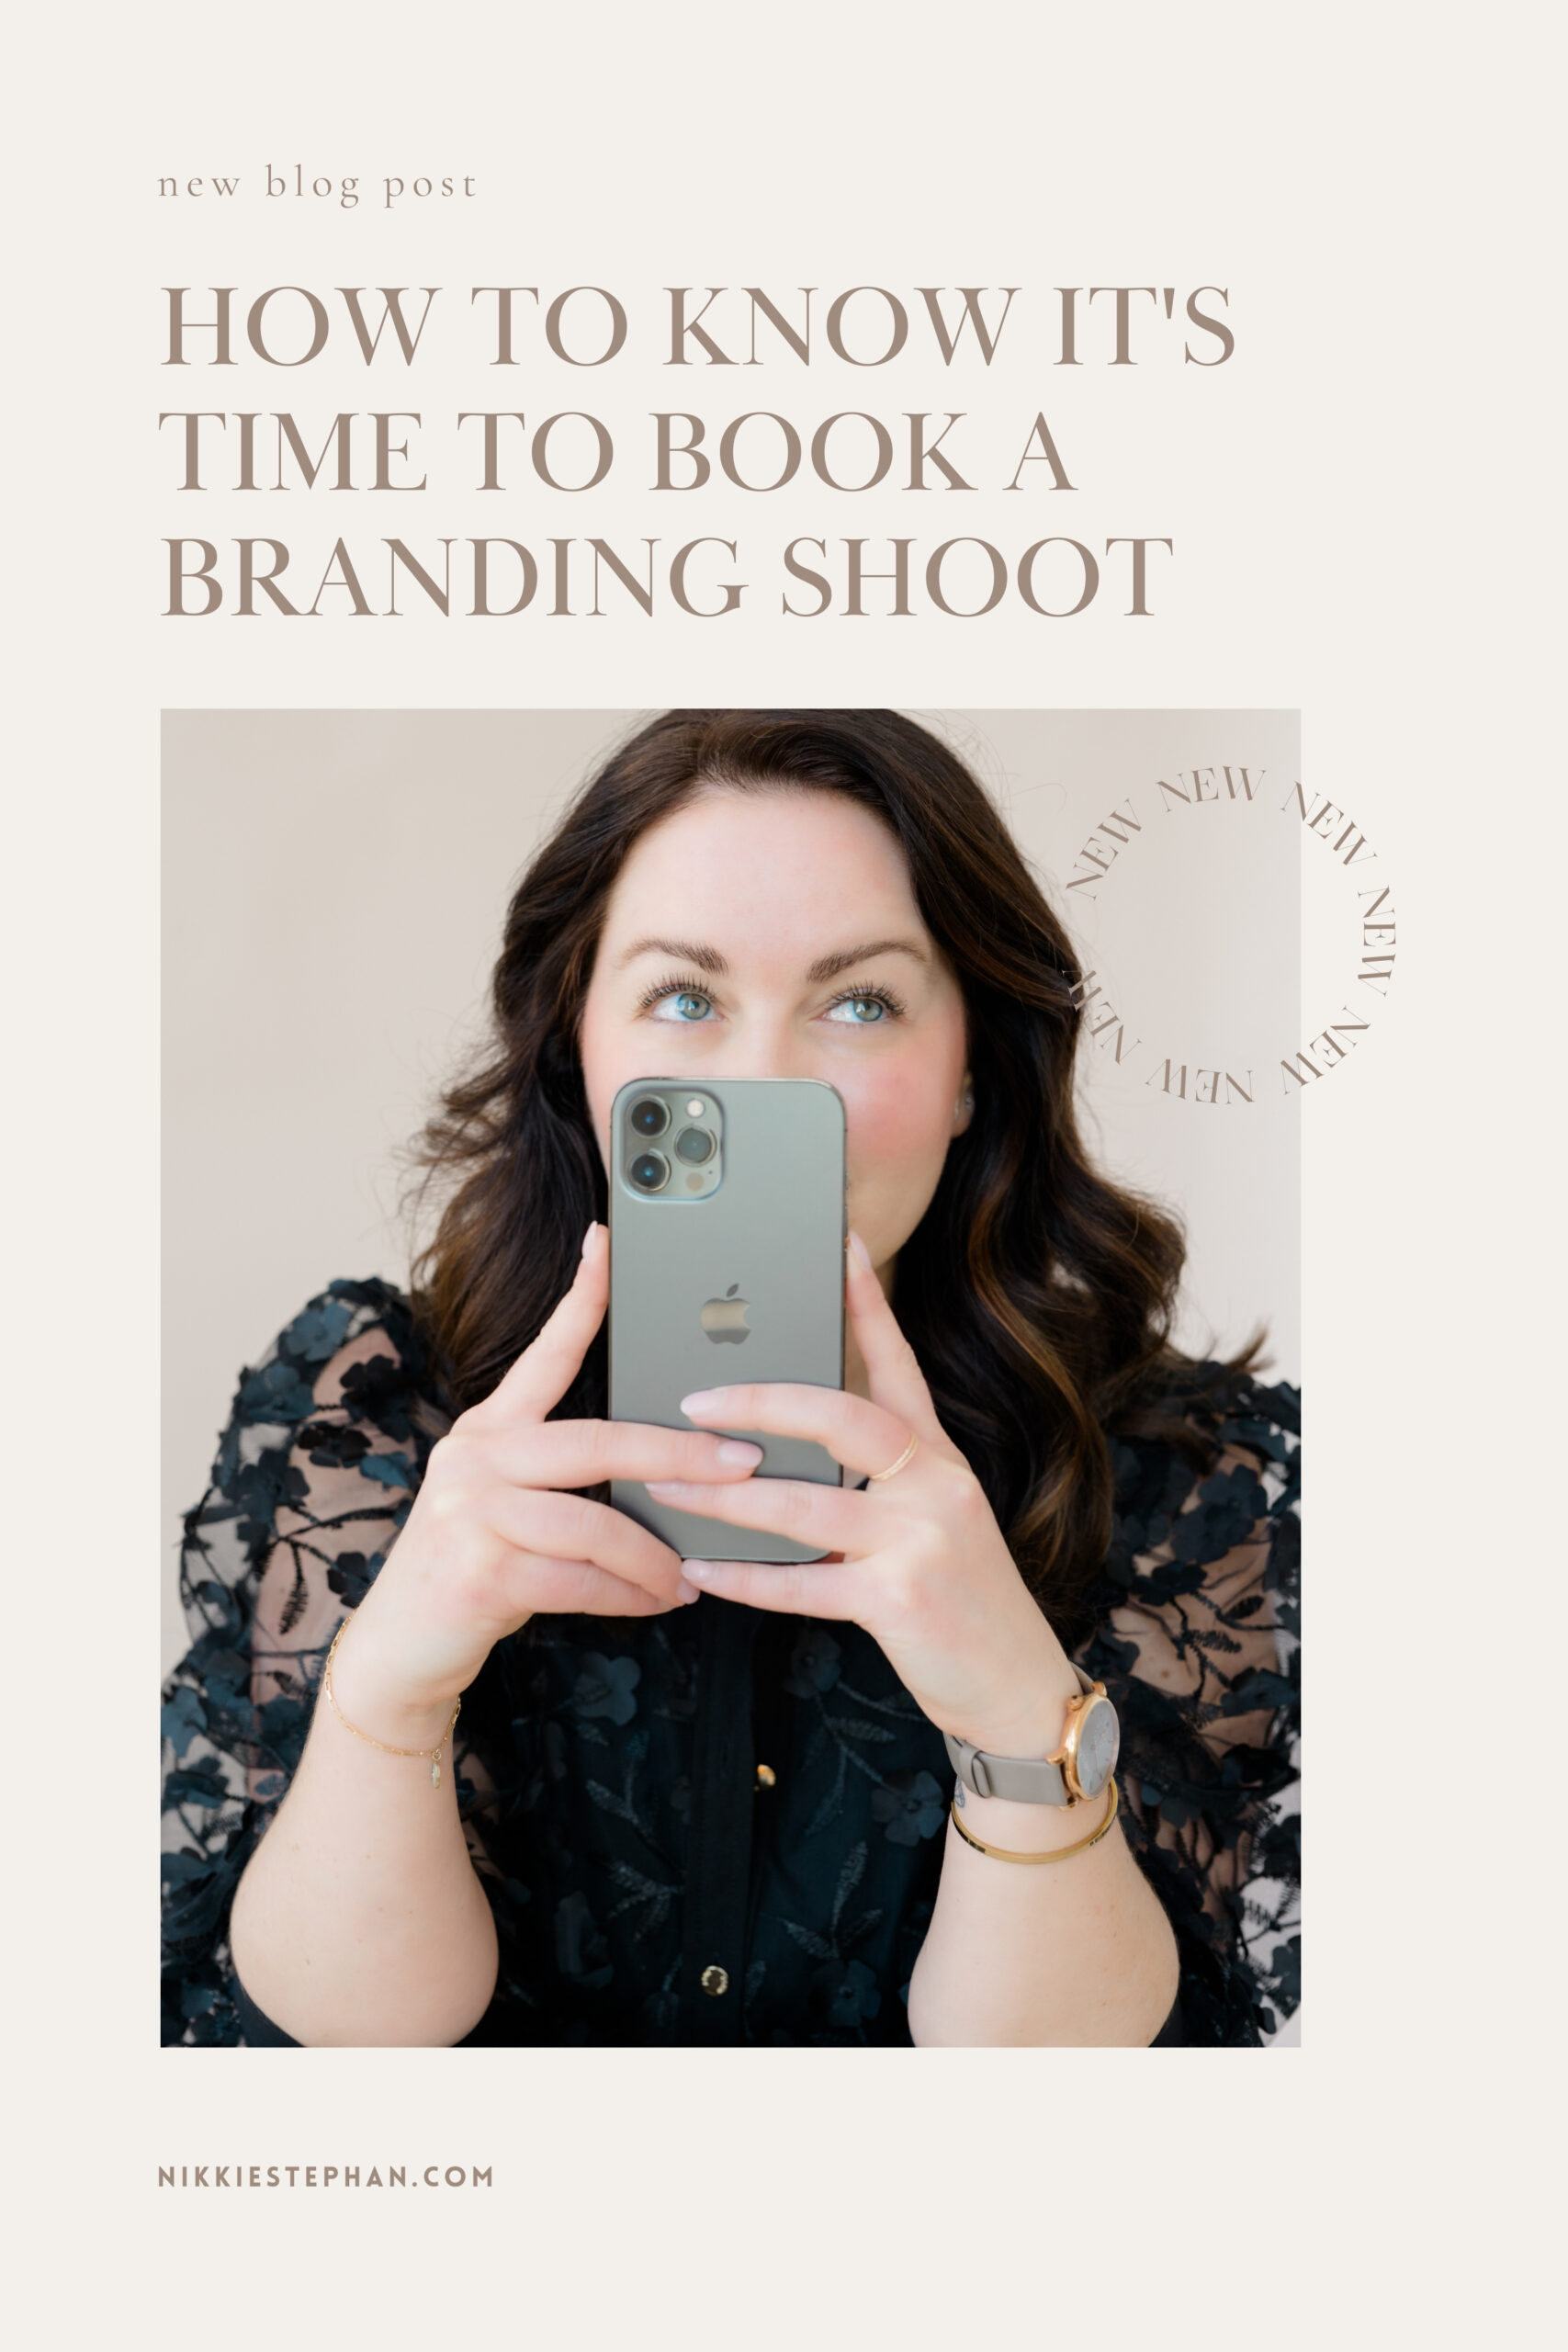 HOW TO KNOW IT'S TIME TO BOOK A BRANDING SHOOT